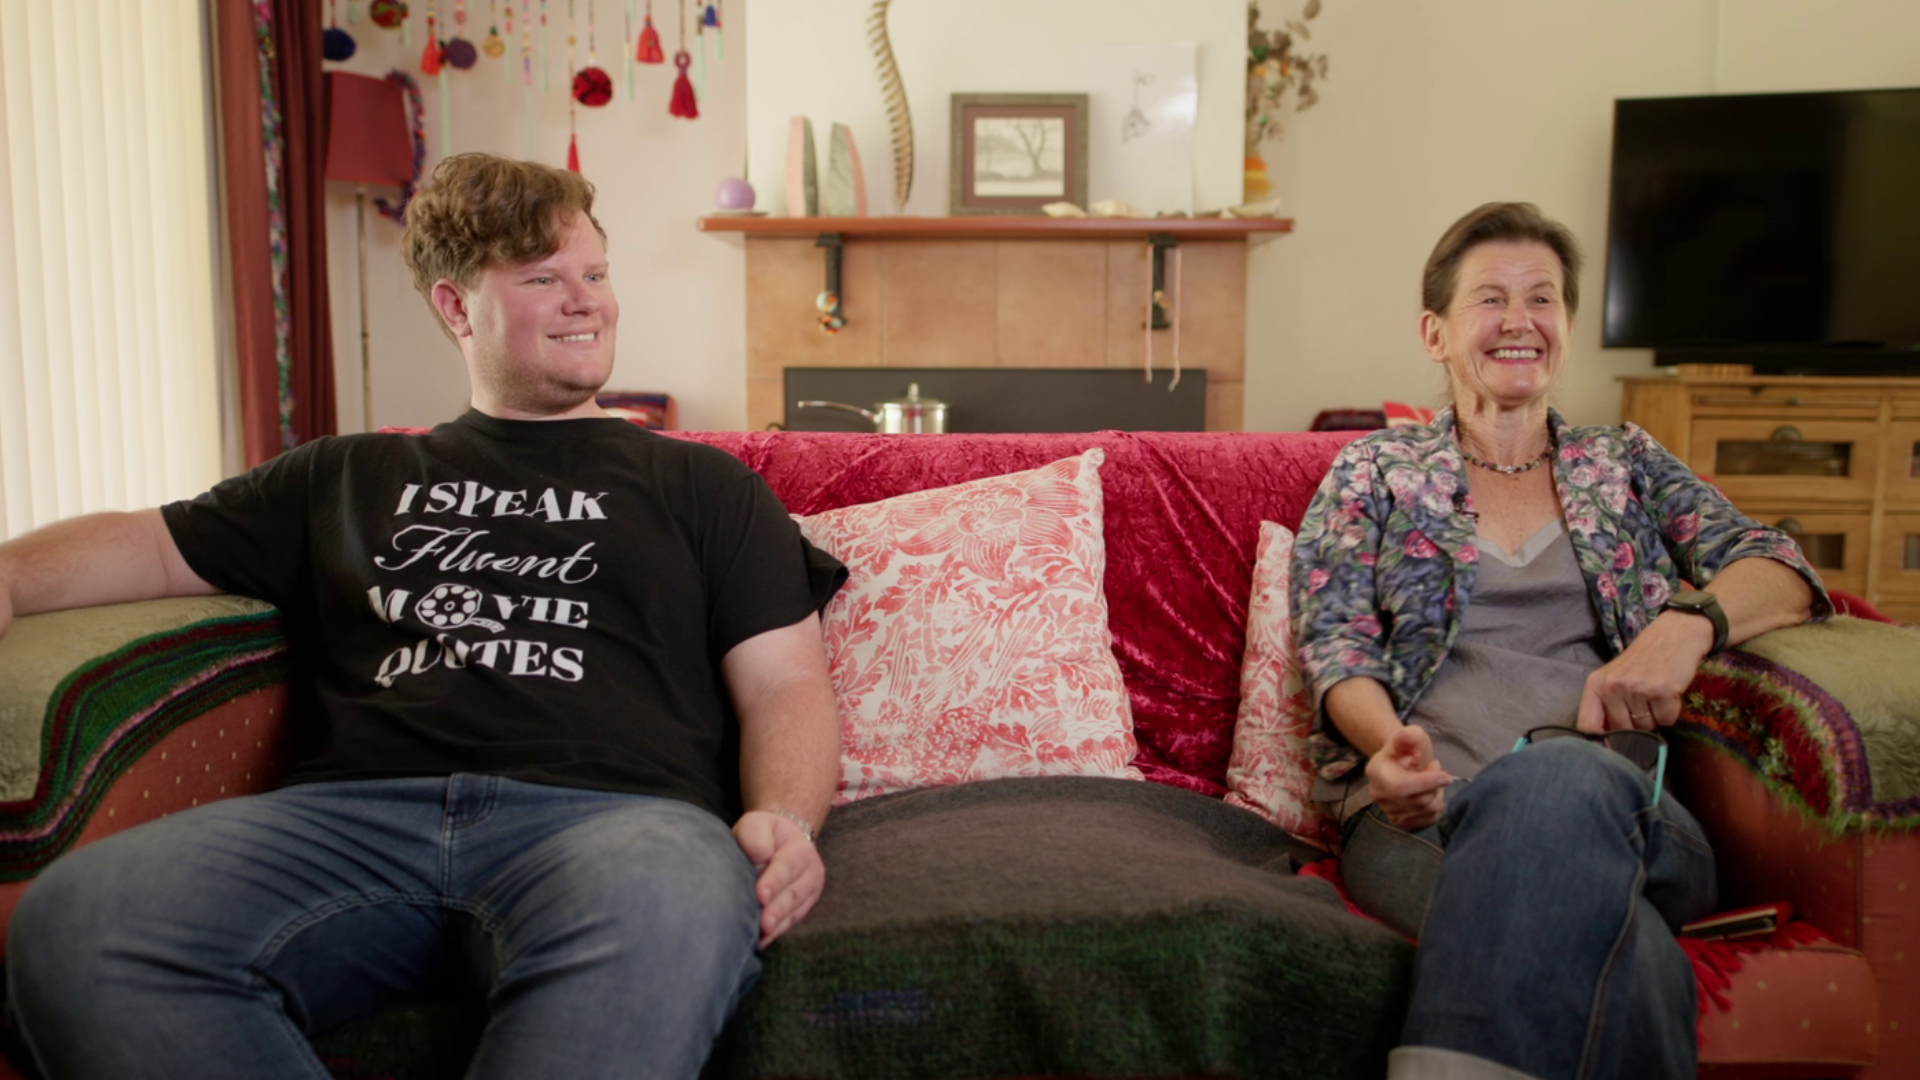 A young man and his mother, an older woman sit on a couch in their home laughing. The young man wears a shirt that says: I speak fluent movie quotes.